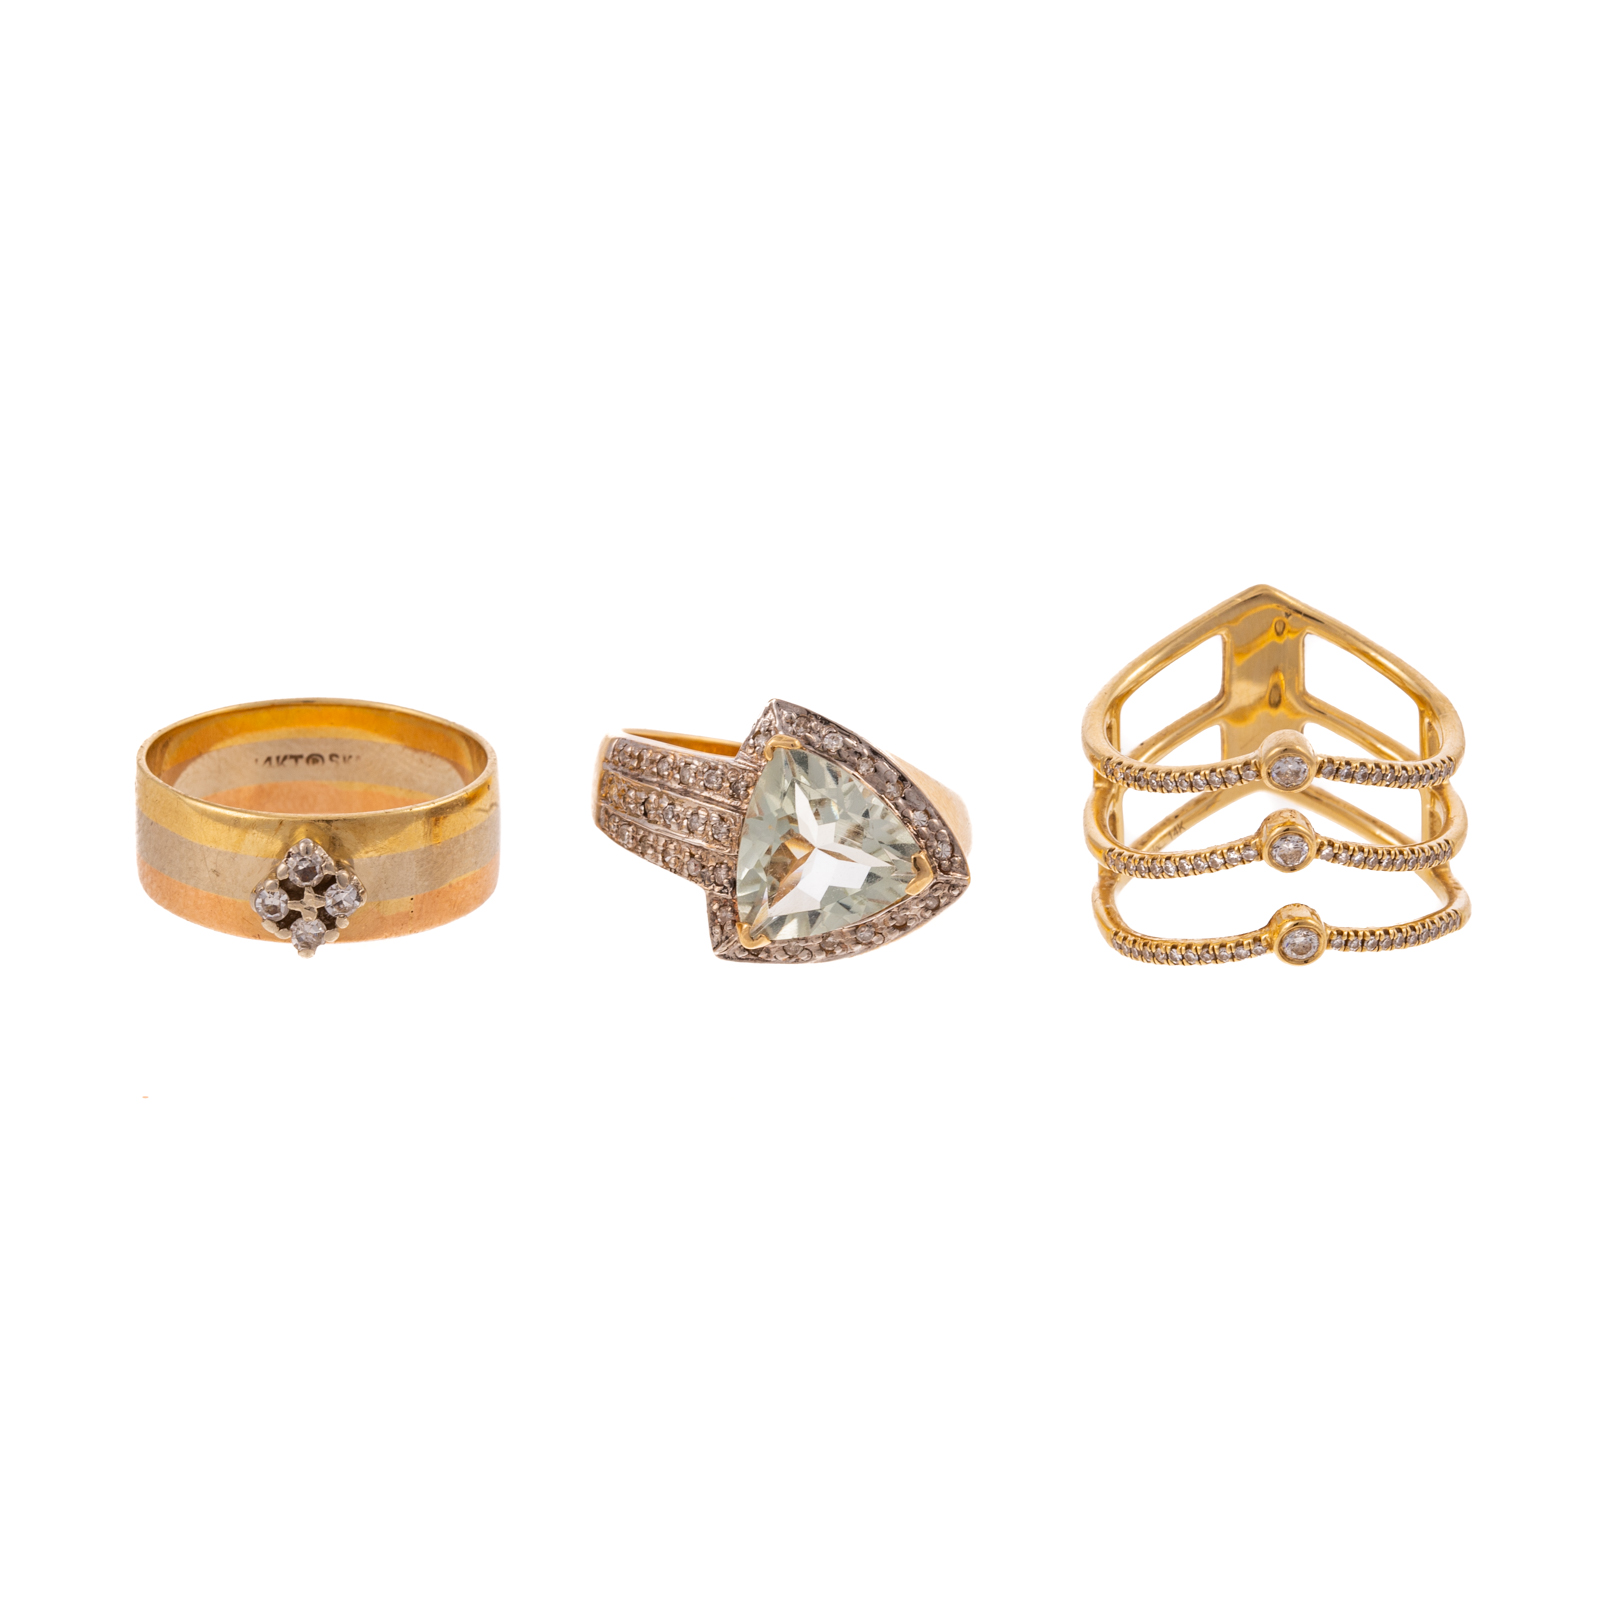 A TRIO OF 14K YELLOW GOLD RINGS 287c95